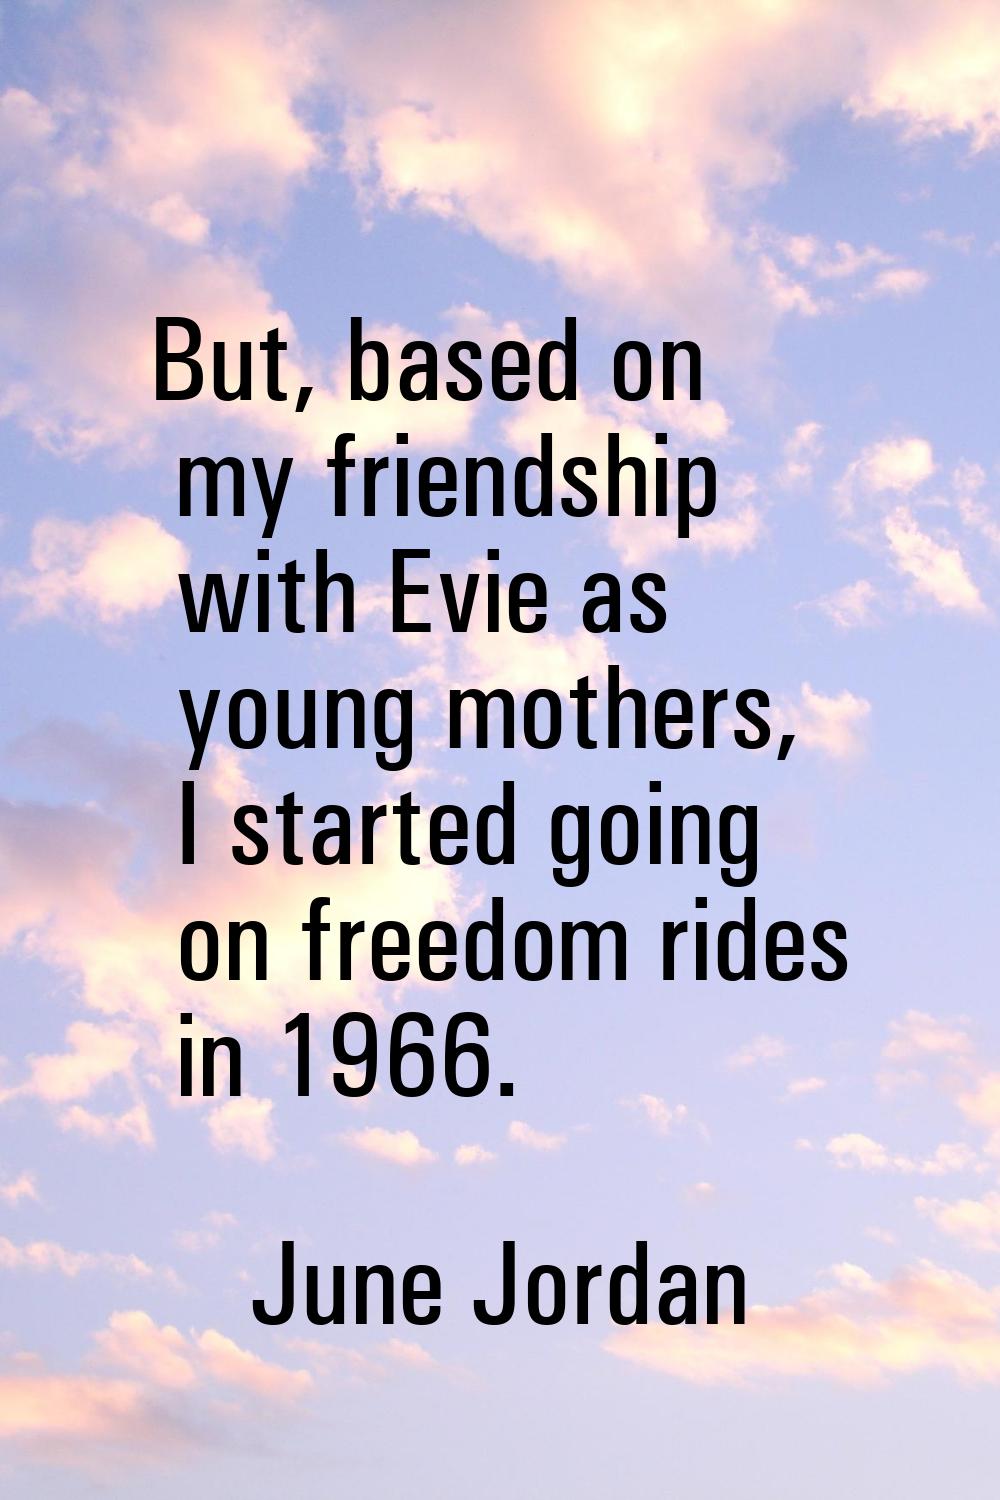 But, based on my friendship with Evie as young mothers, I started going on freedom rides in 1966.